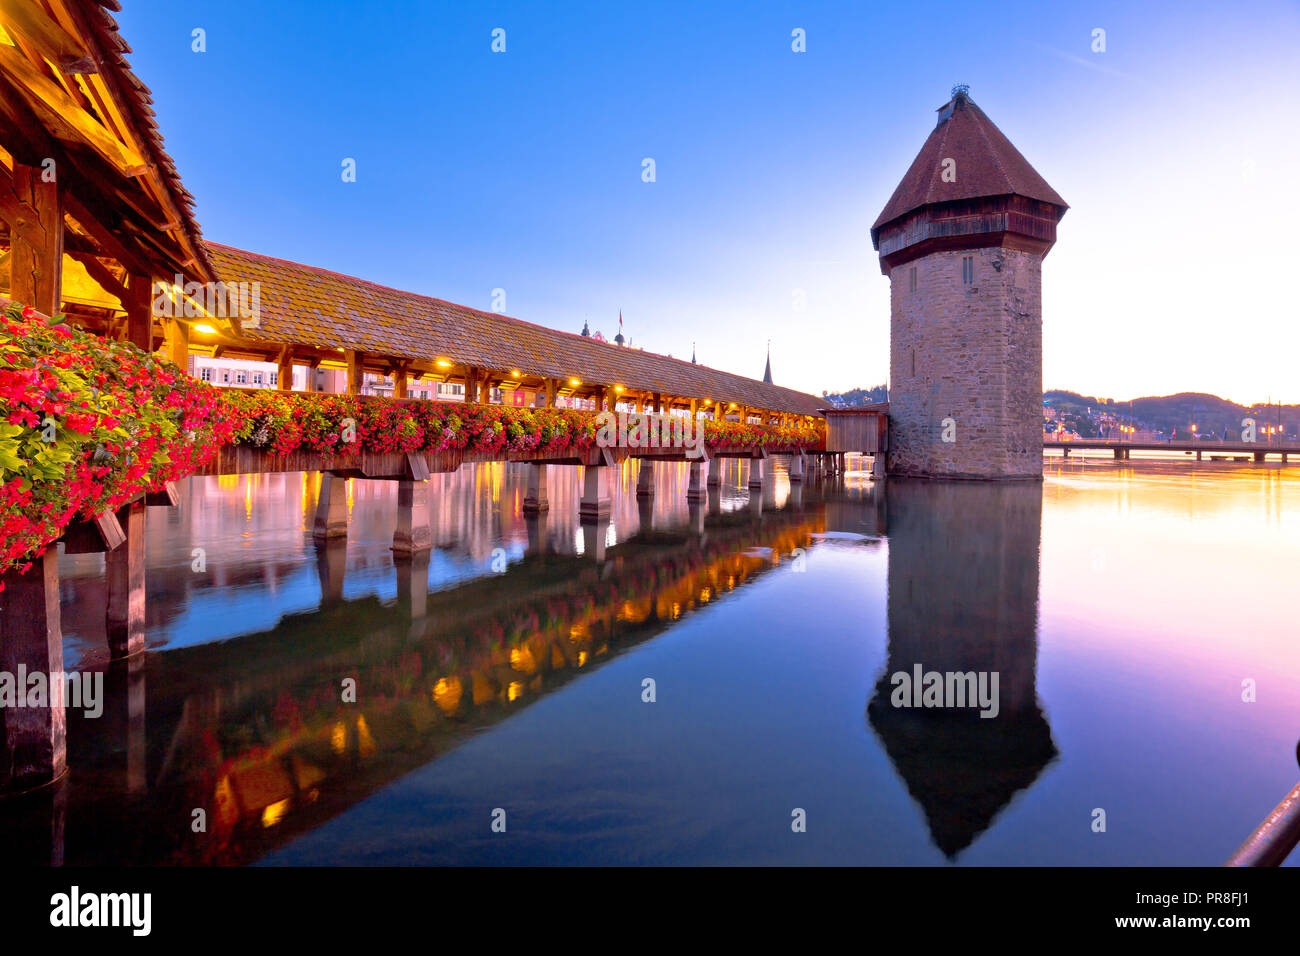 Luzern wooden Chapel Bridge and tower dawn view, town in central Switzerland Stock Photo